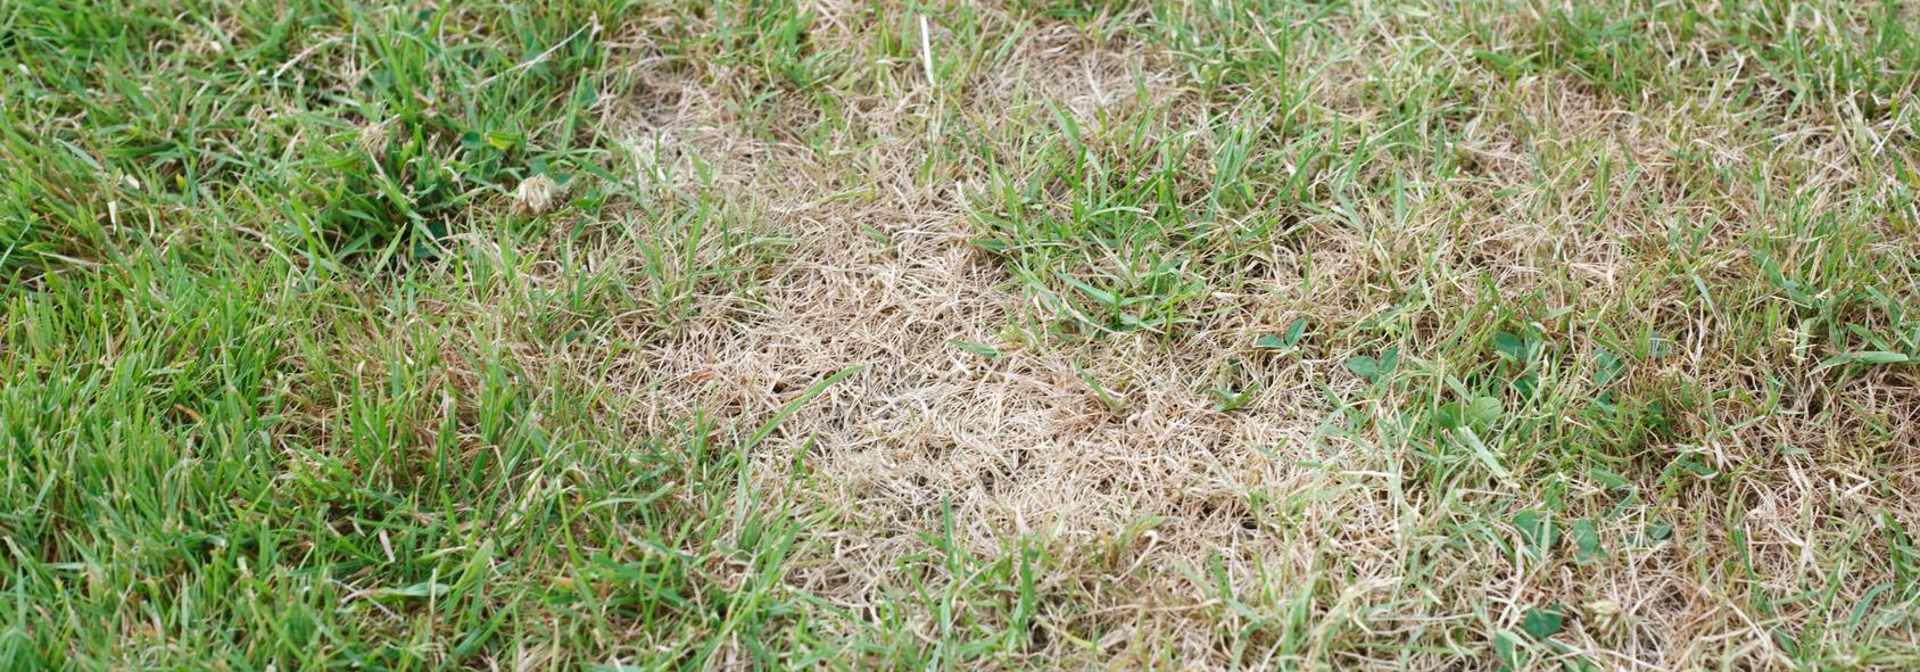 Brown Spots In Lawn How To Fix Davey Tree